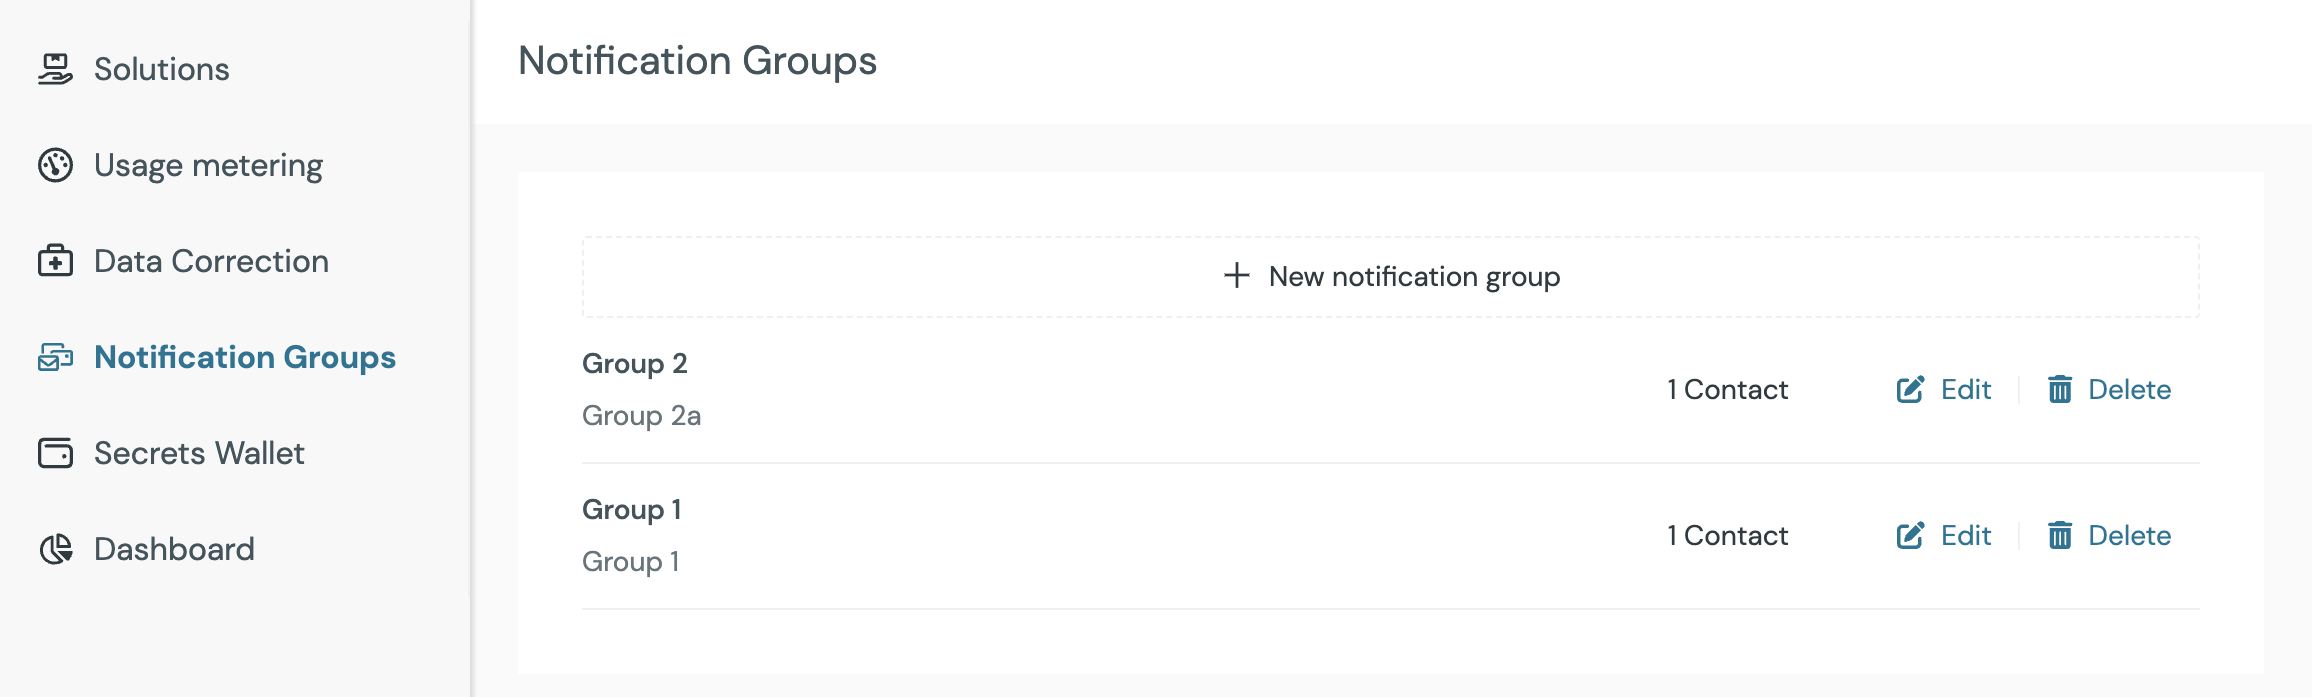 Previous UI for Notification Group